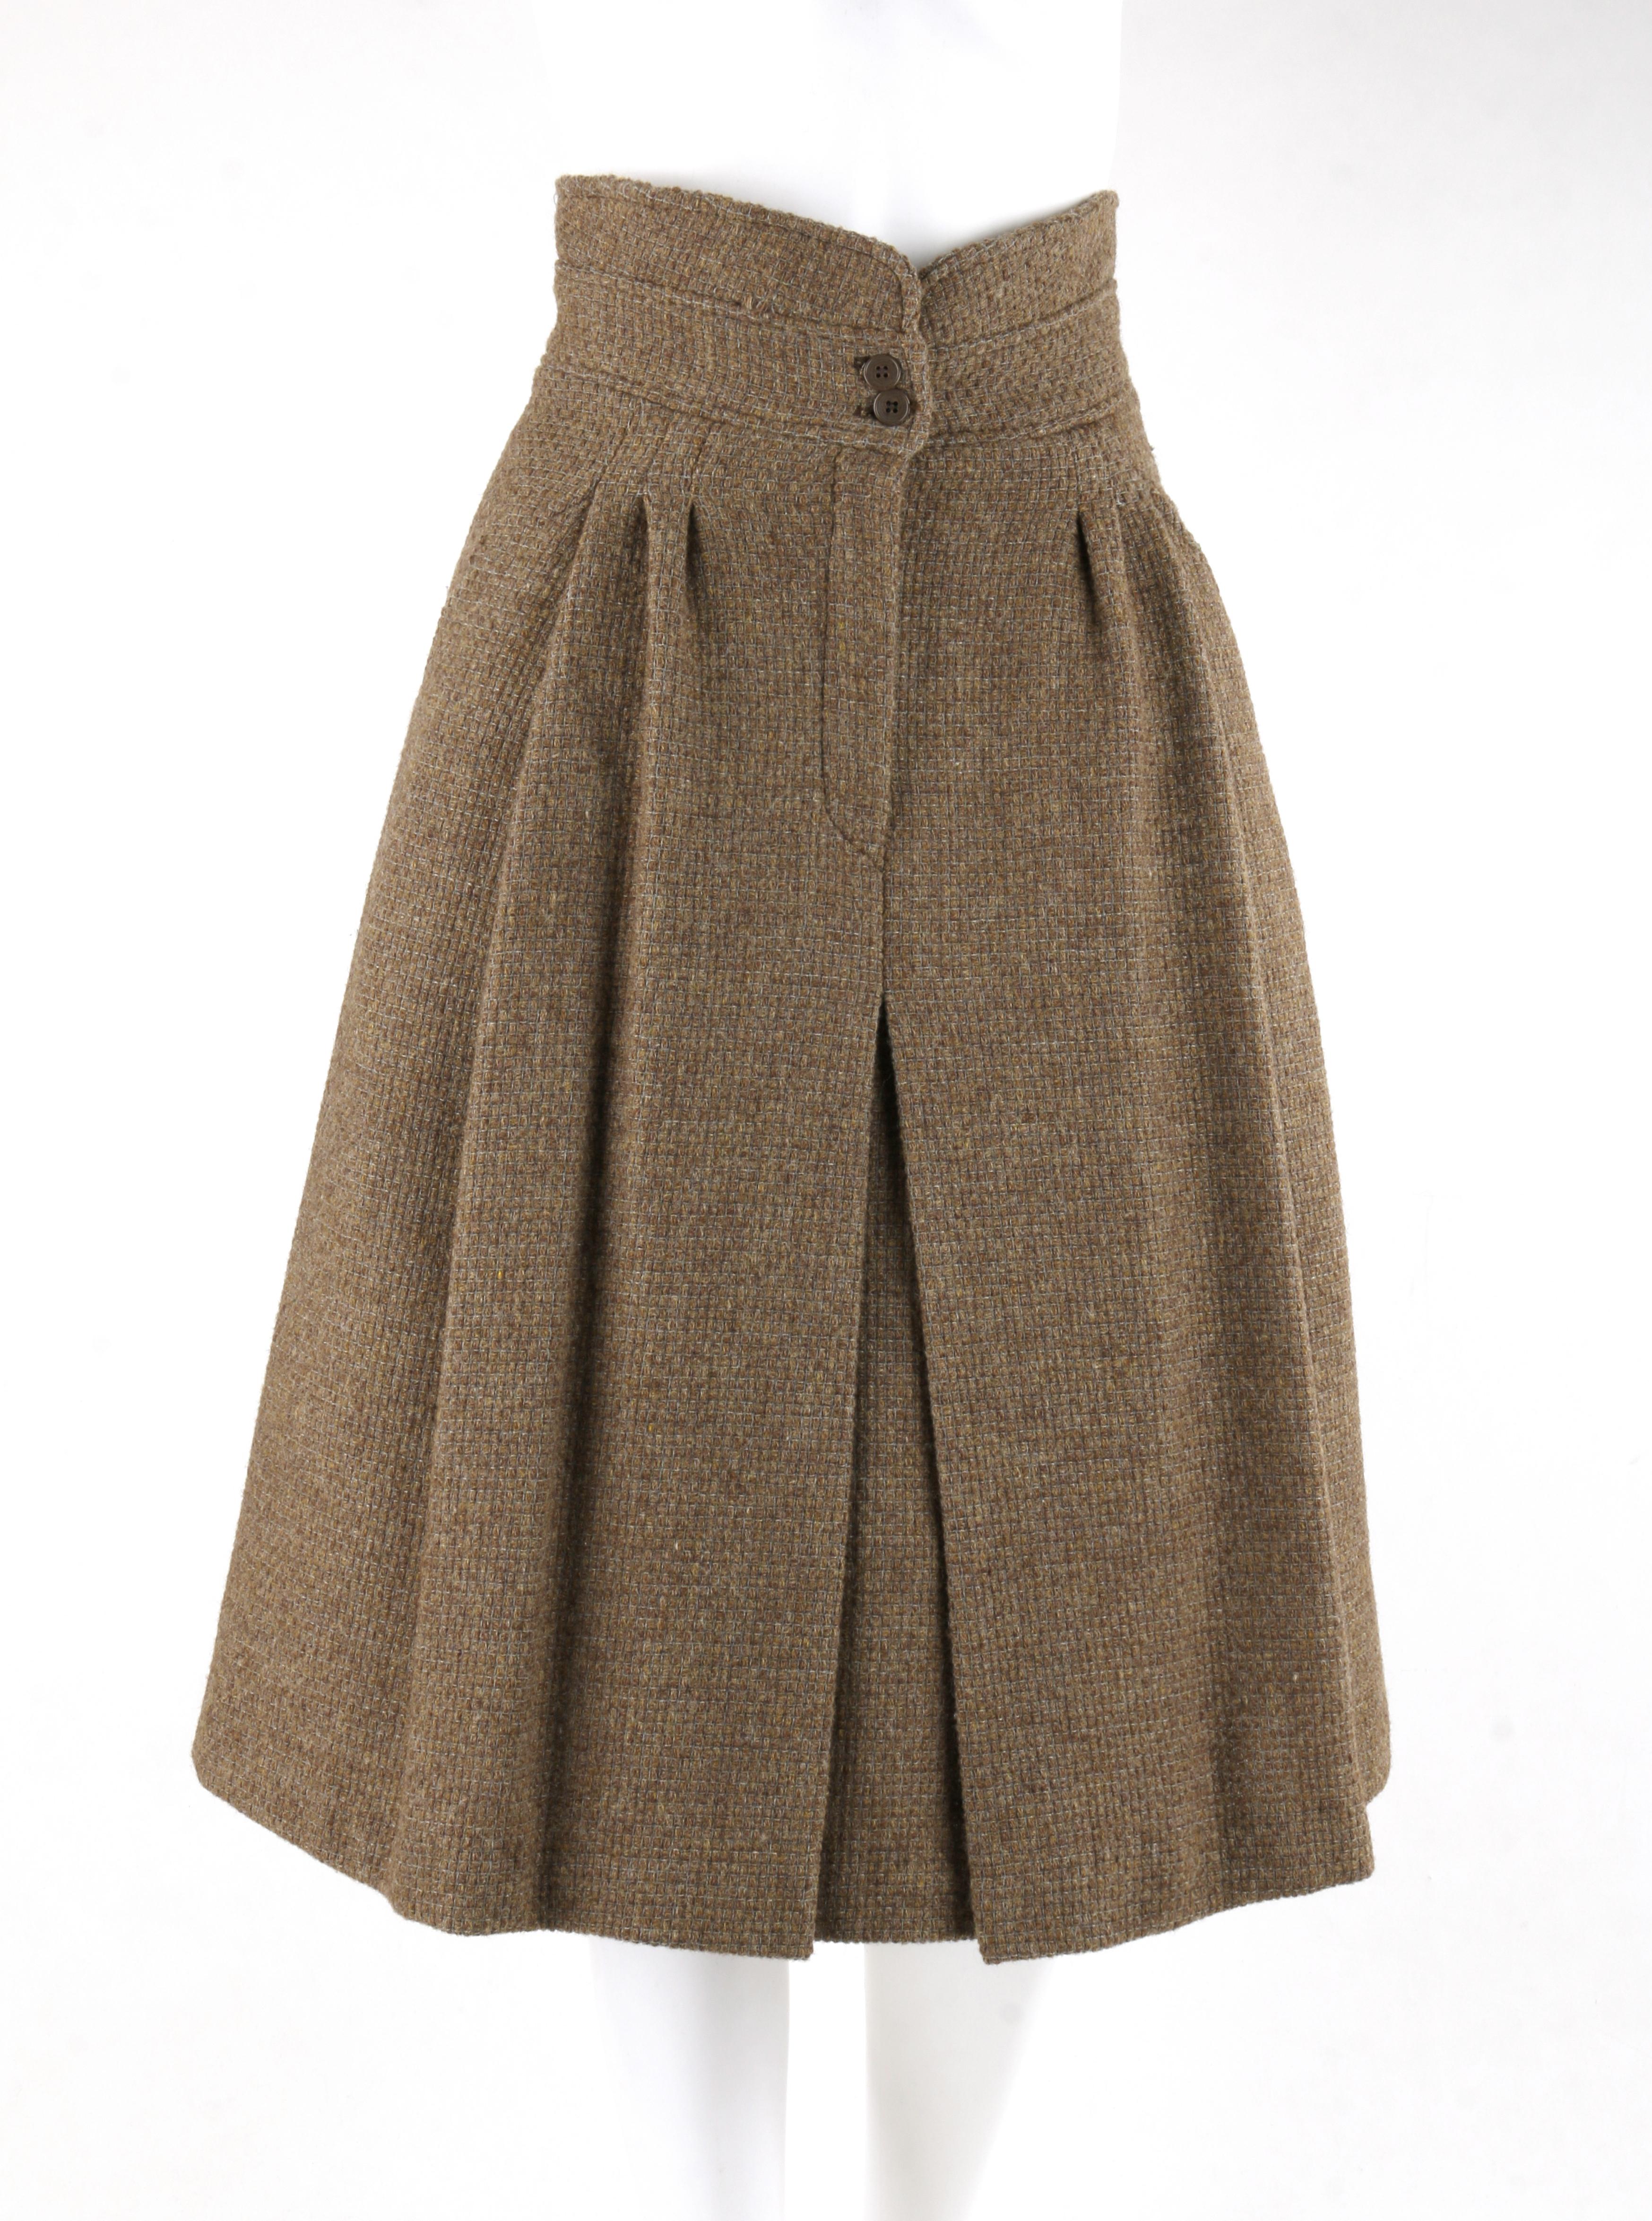 GIORGIO ARMANI c.1980’s Brown Tweed Wool Pleated Fit And Flare A-Line Skirt 
 
Circa: 1980’s 
Label(s): Giorgio Armani   
Designer: Giorgio Armani
Style: Fit & Flare / A-Line
Color(s): Shades of brown and grey
Lined: Yes
Marked Fabric Content: 100%